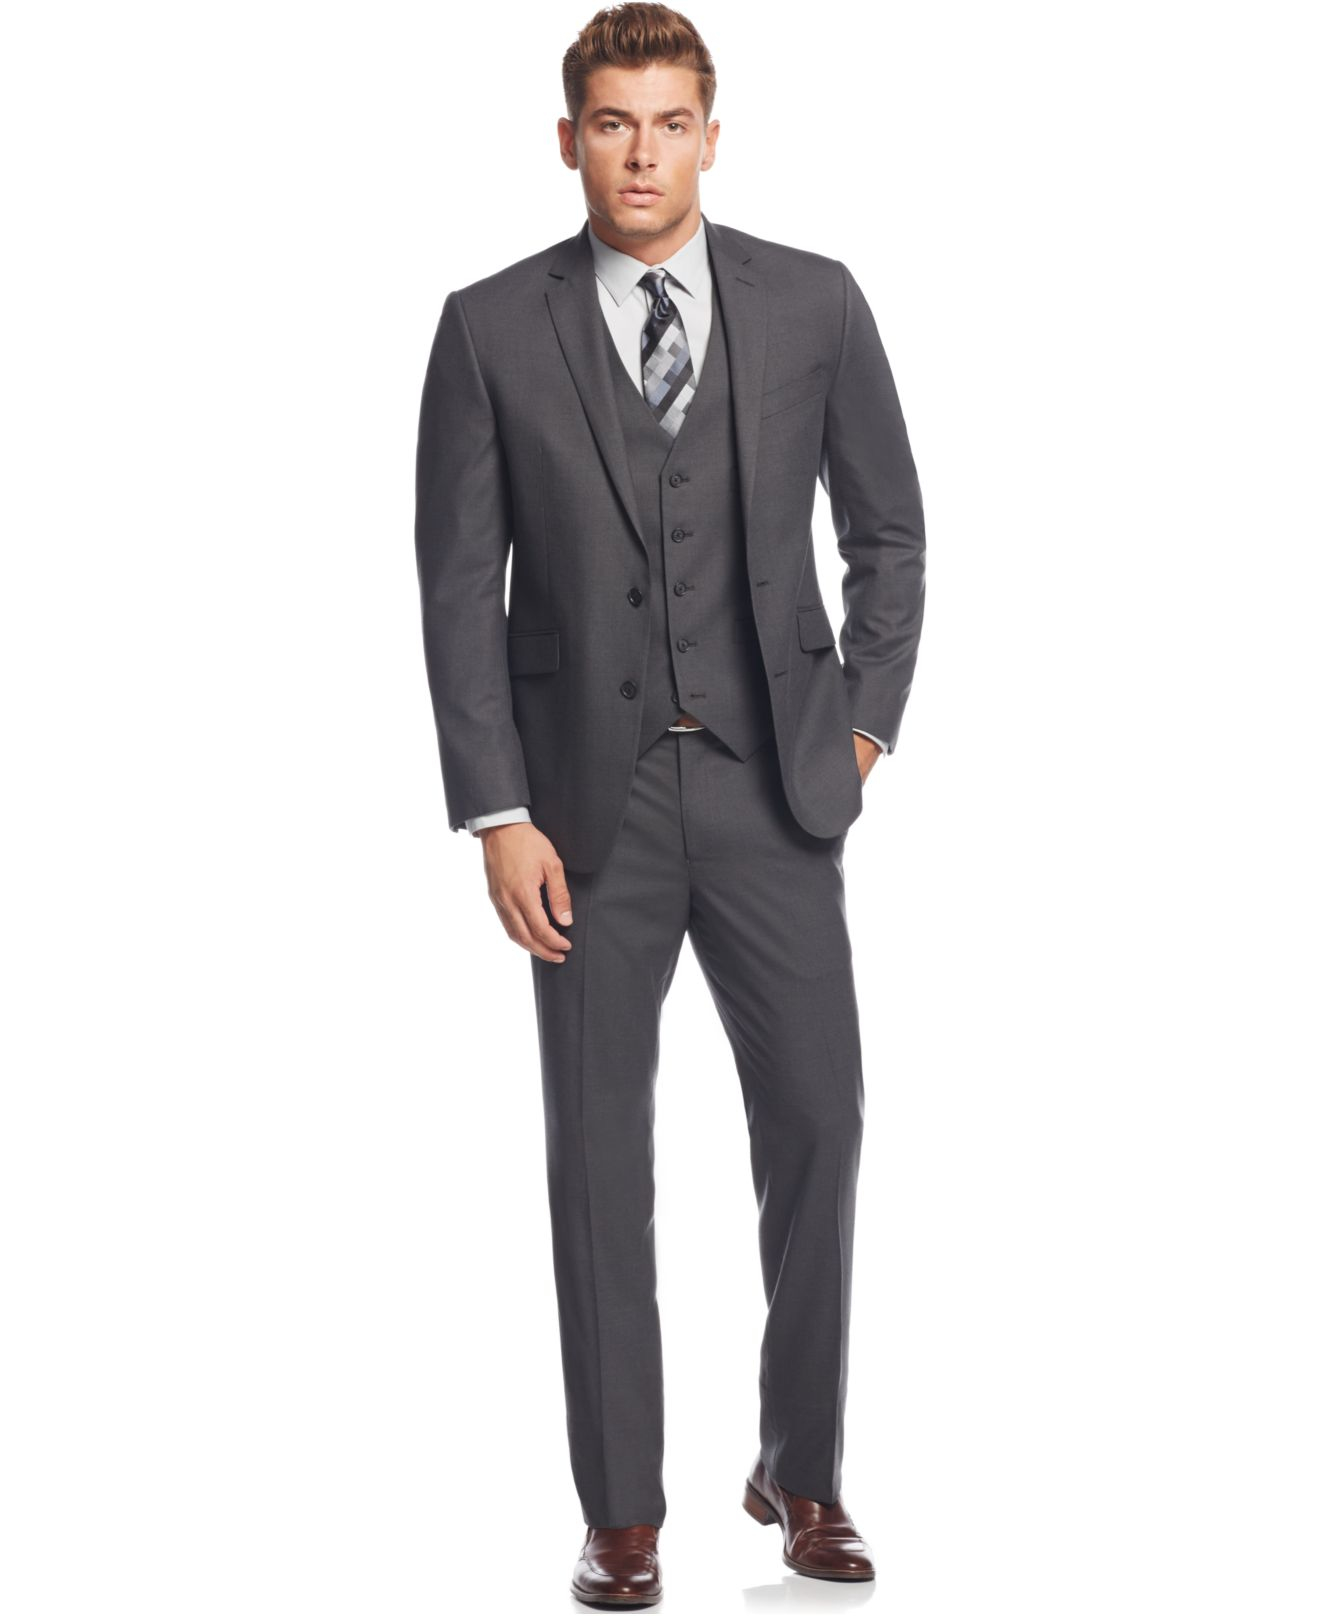 Lyst - Kenneth Cole Reaction Grey Tonal Shadow Check Slim-fit Vested ...